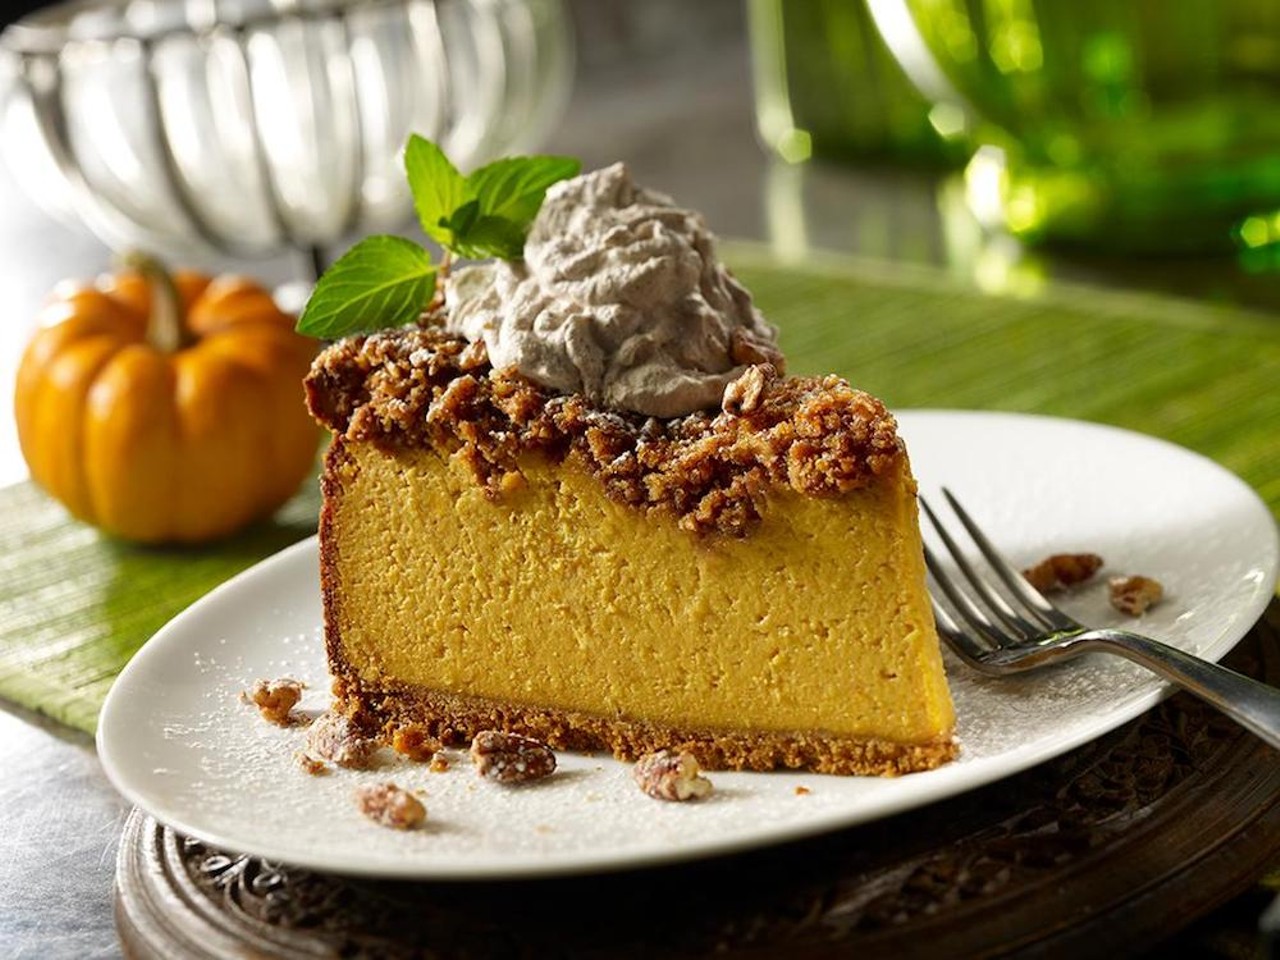 Maggiano&#146;s Little Italy
203 Westshore Plaza, Tampa.
Dine in over a four-course, family-style spread with your loved ones, or take a meal package to-go. Either way, that pumpkin praline cheesecake awaits.
Photo via Maggiano&#146;s